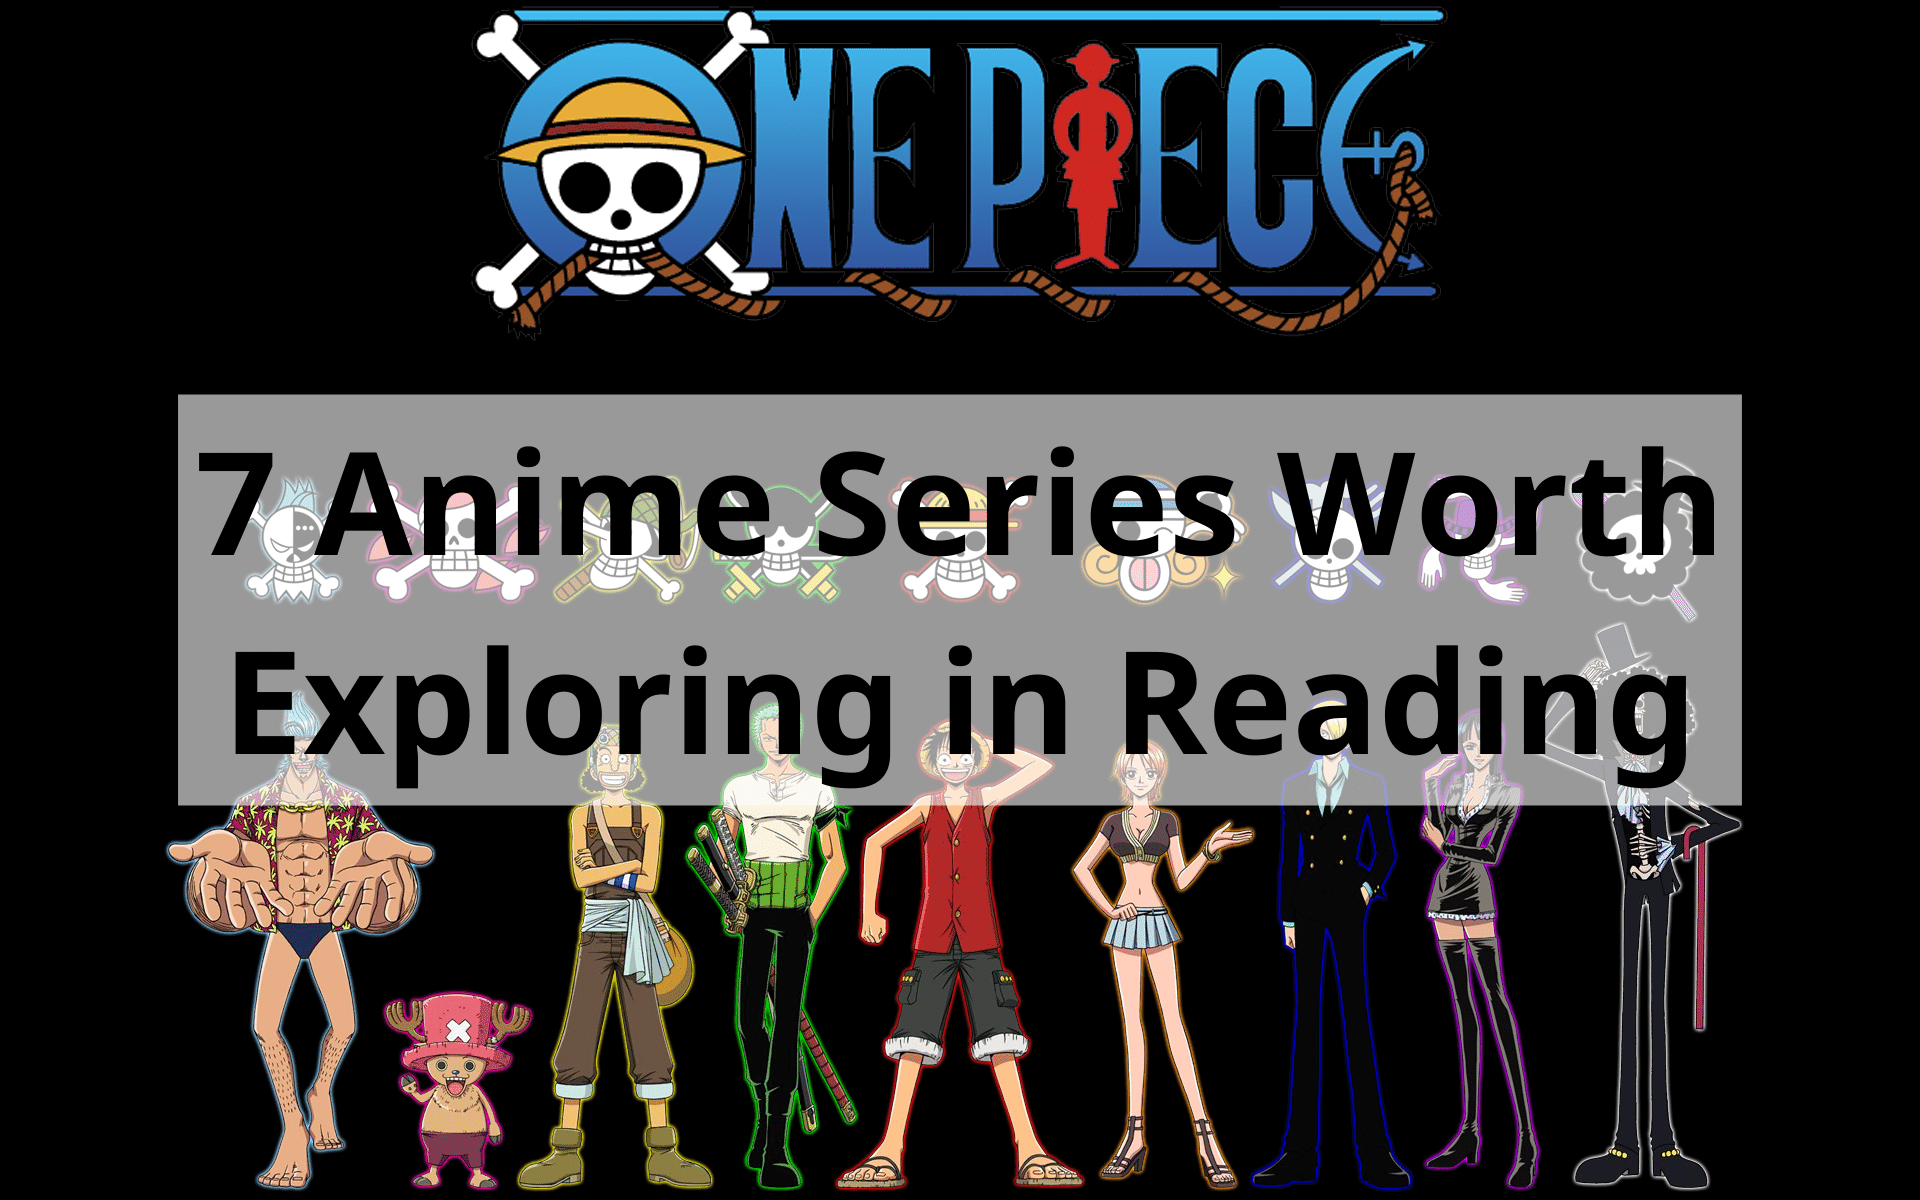 7 Anime Series Worth Exploring in Reading